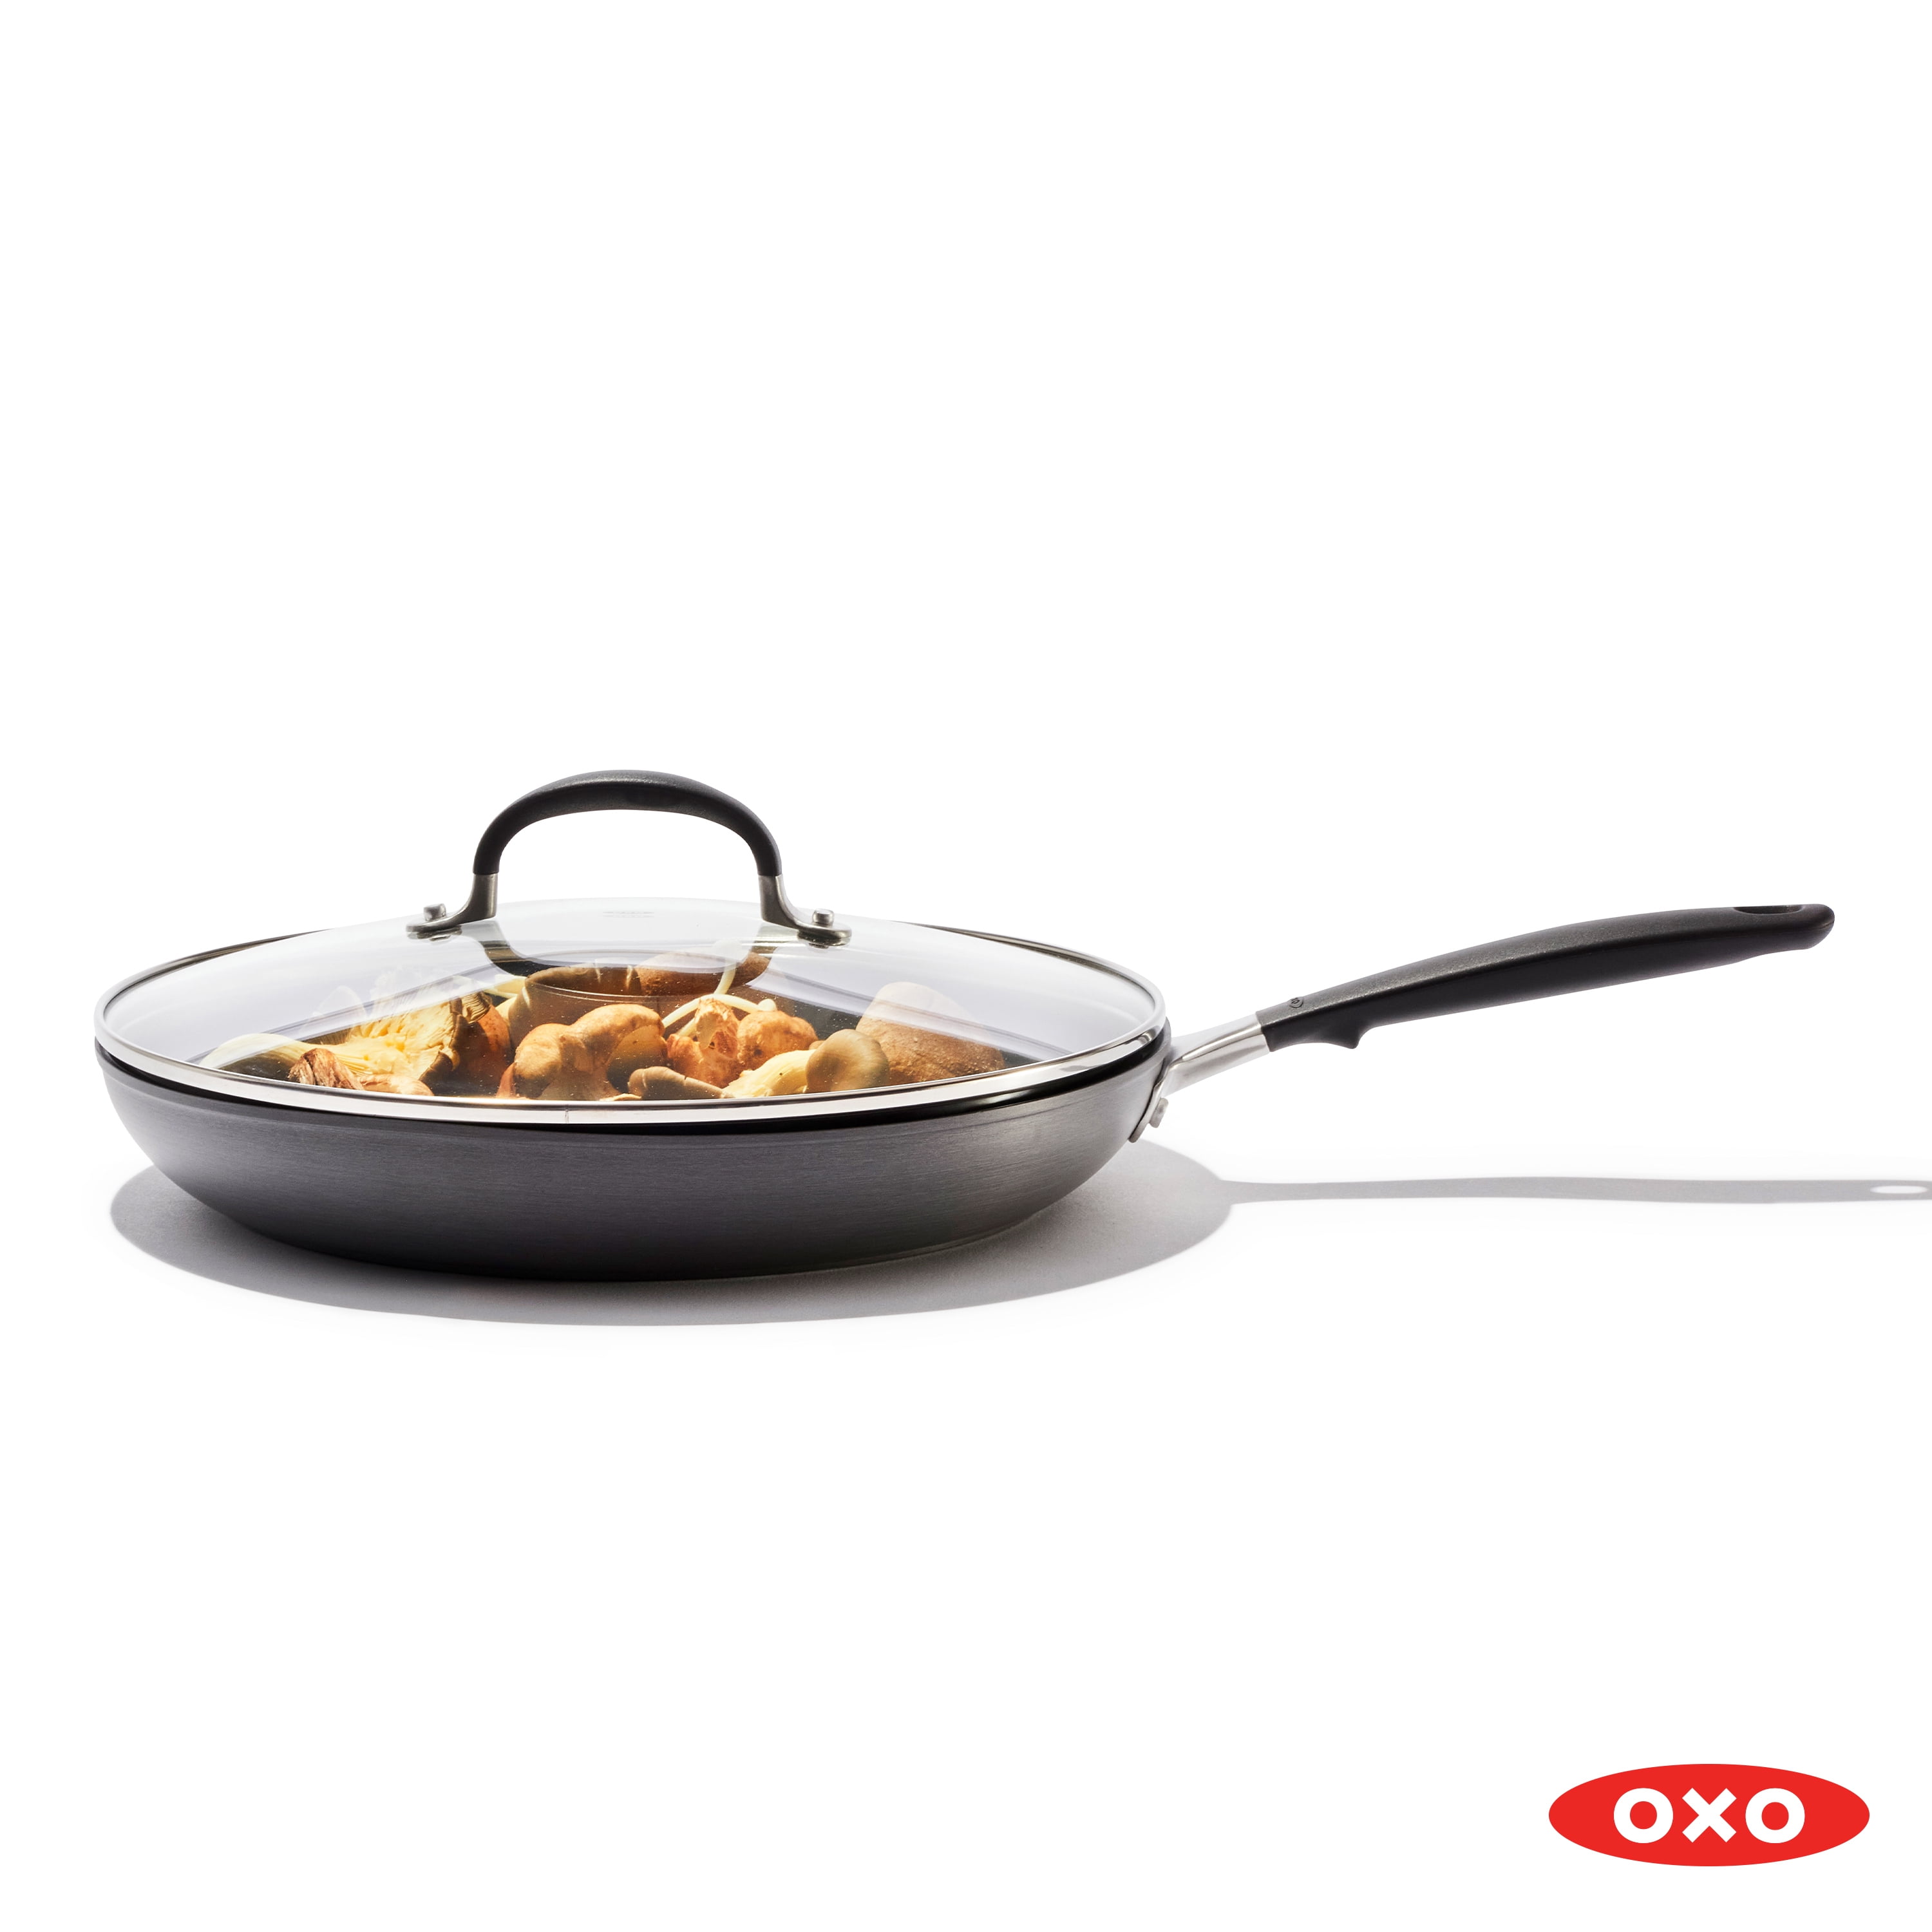 OXO Good Grips 12 Frying Pan Skillet, 3-Layered German Engineered Nonstick  Coating, Stainless Steel Handle with Nonslip Silicone, Black